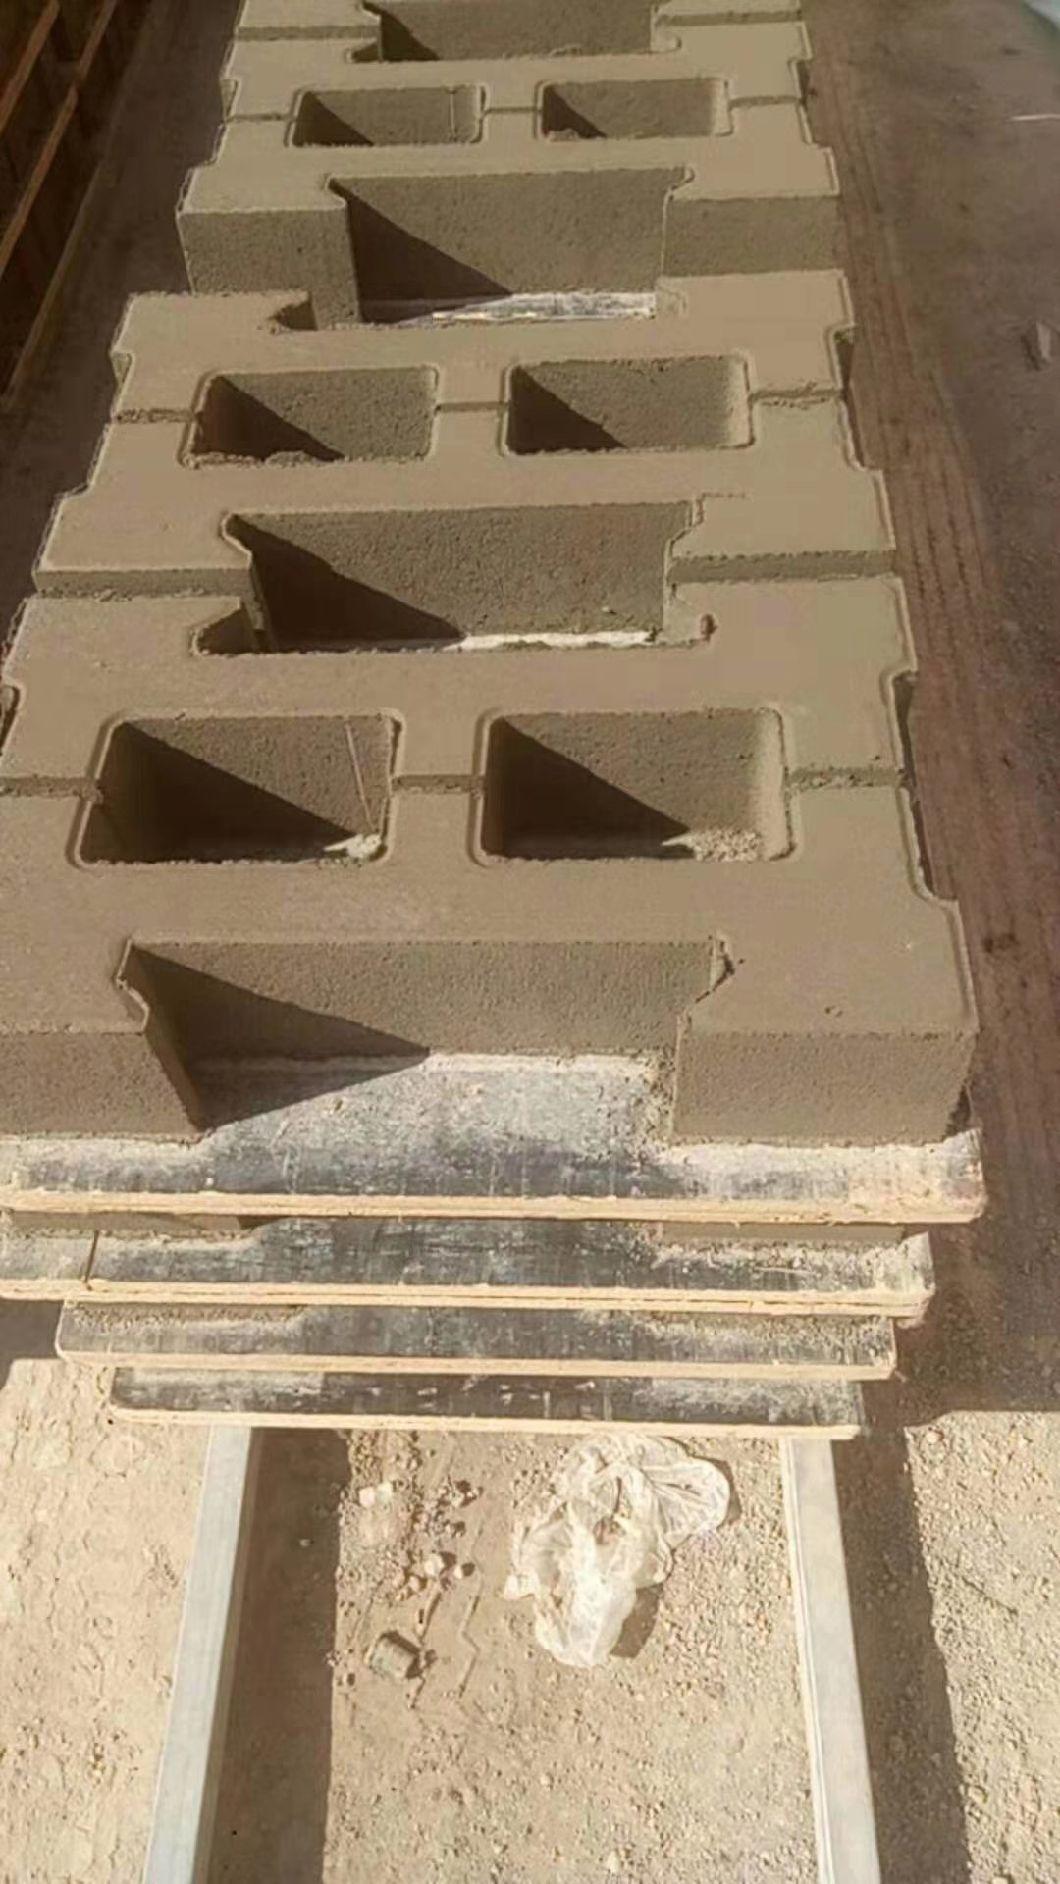 The Price Can Be Adjusted According to The Actual Situation Brick Making Machine